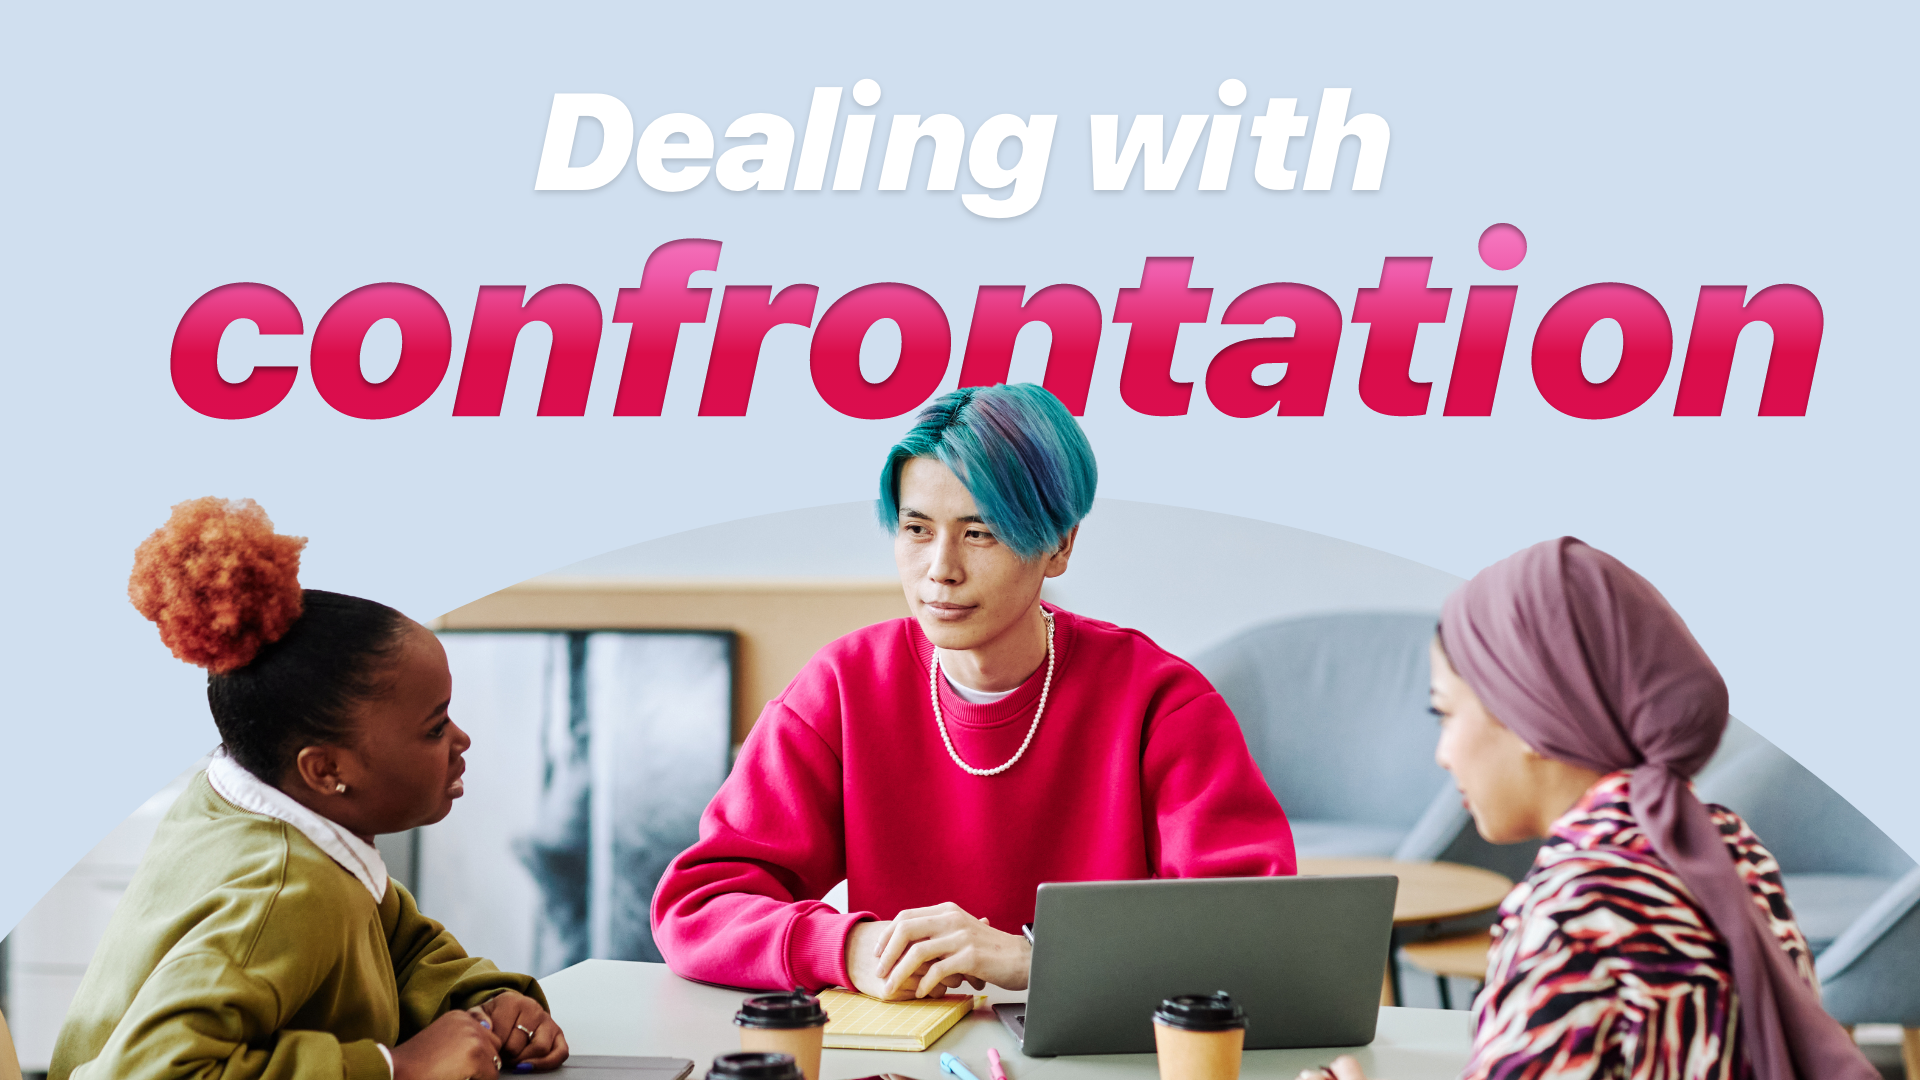 005. Dealing with confrontation